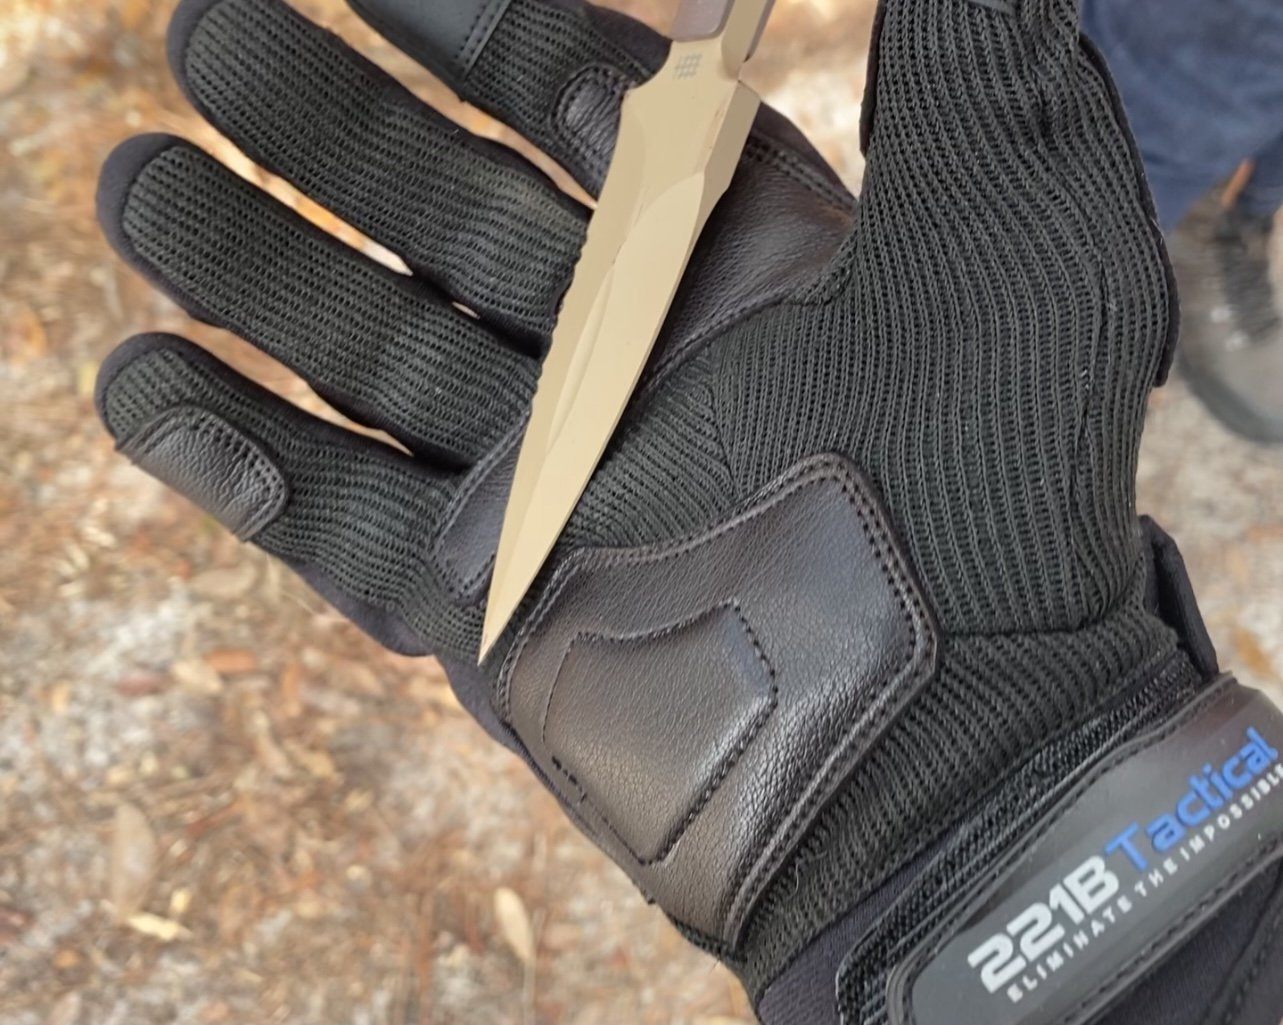 What Are Cut Resistant Gloves?